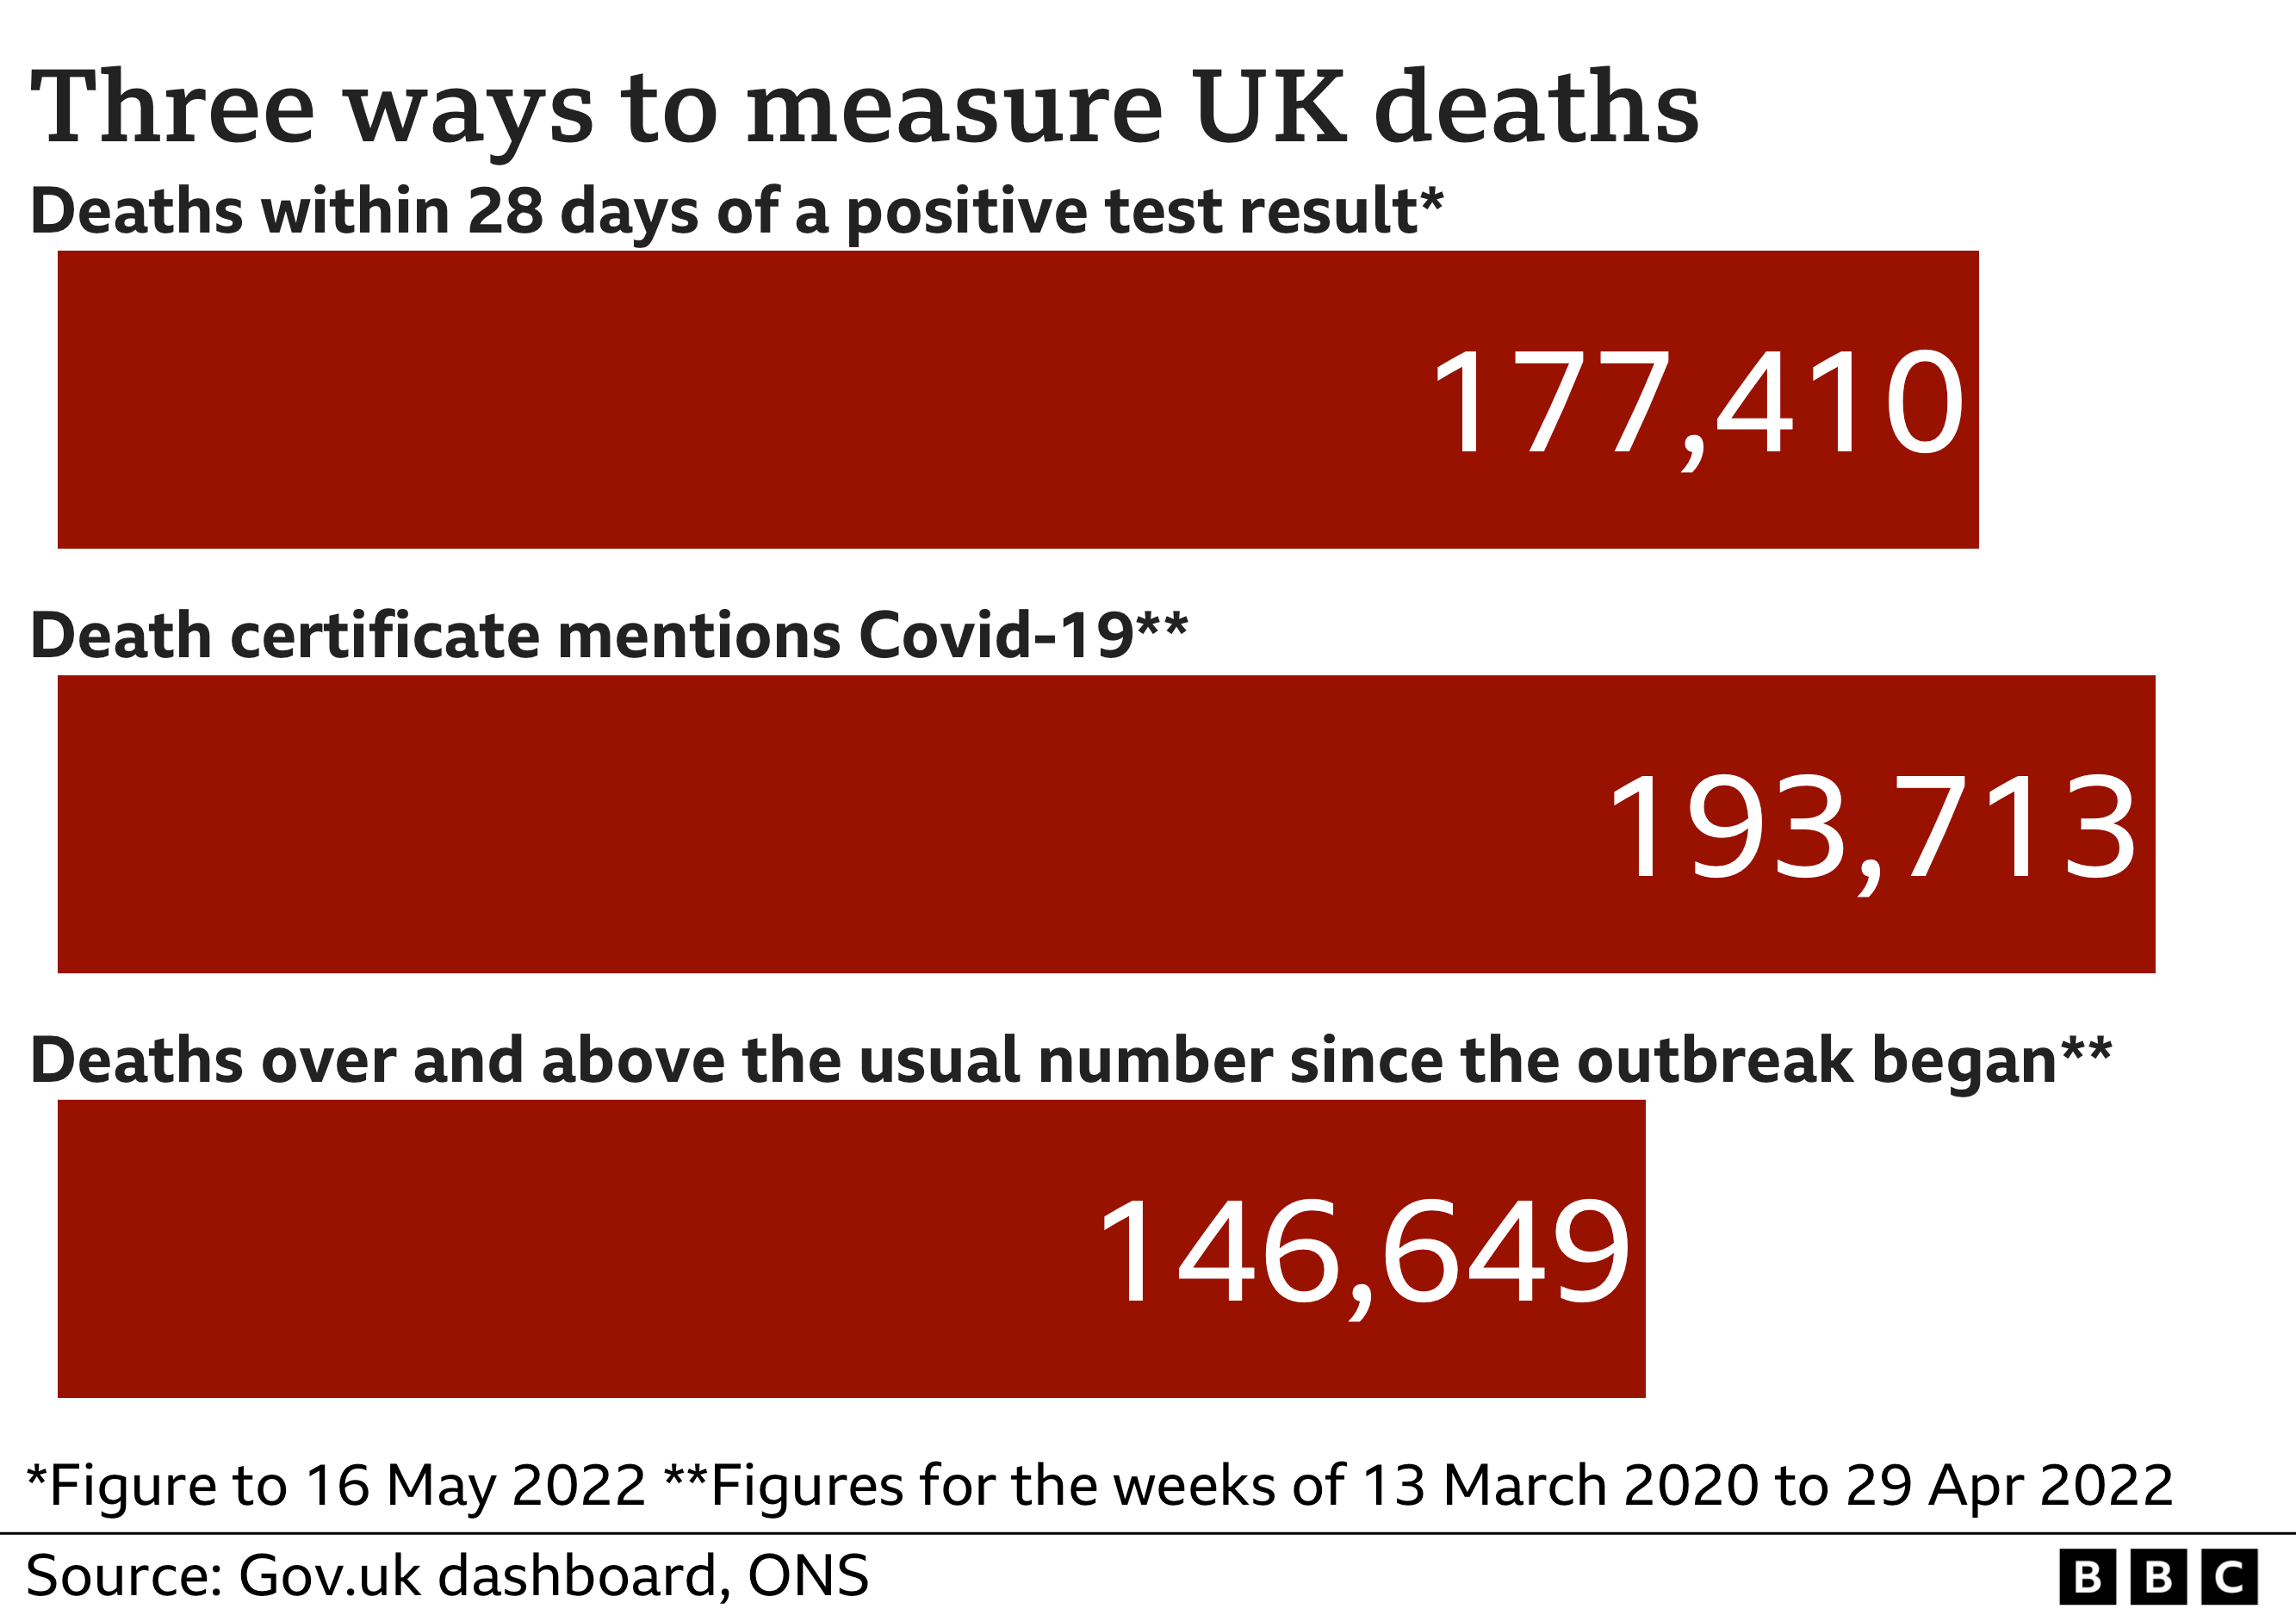 chart showing three ways to measure UK Covid deaths